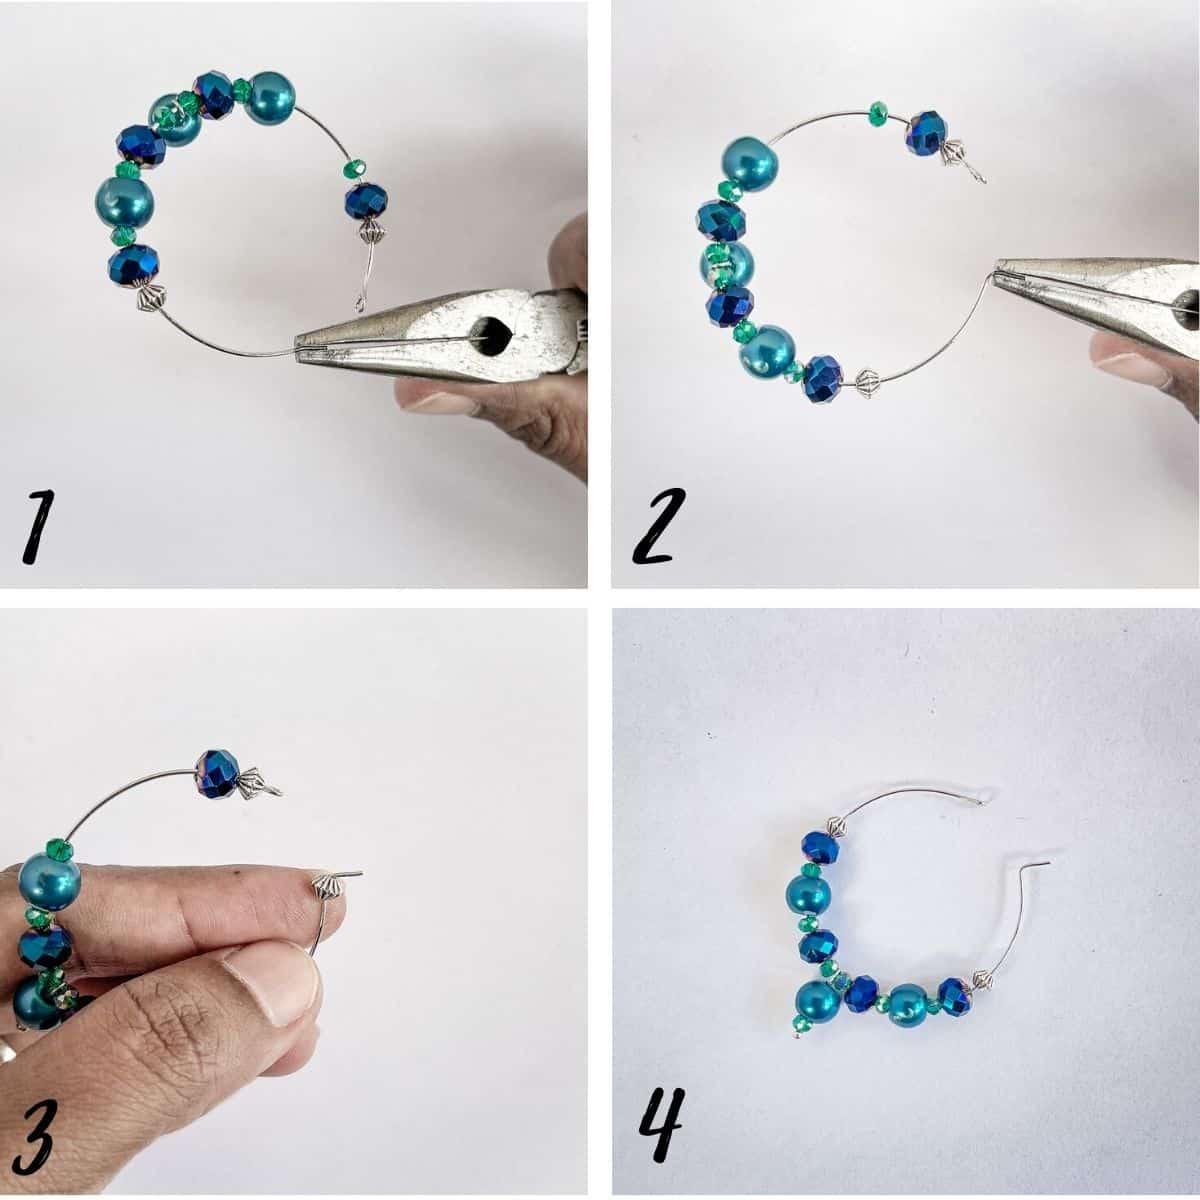 A poster of 4 images showing how to adjust an earring hoop after inserting beads.